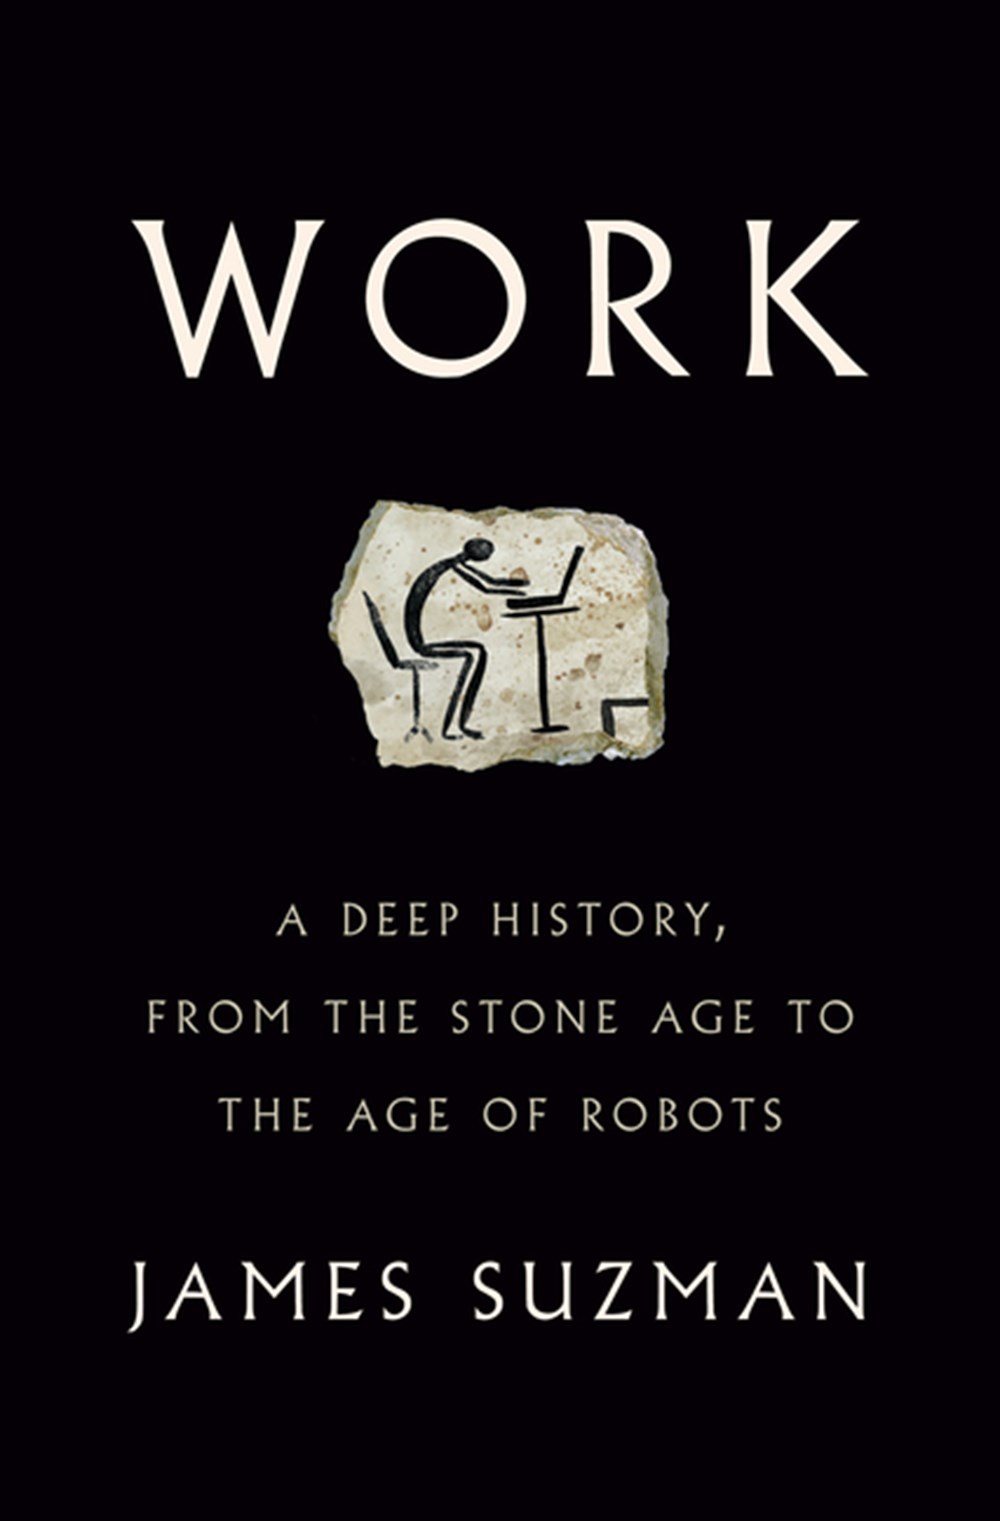 Work A Deep History, from the Stone Age to the Age of Robots